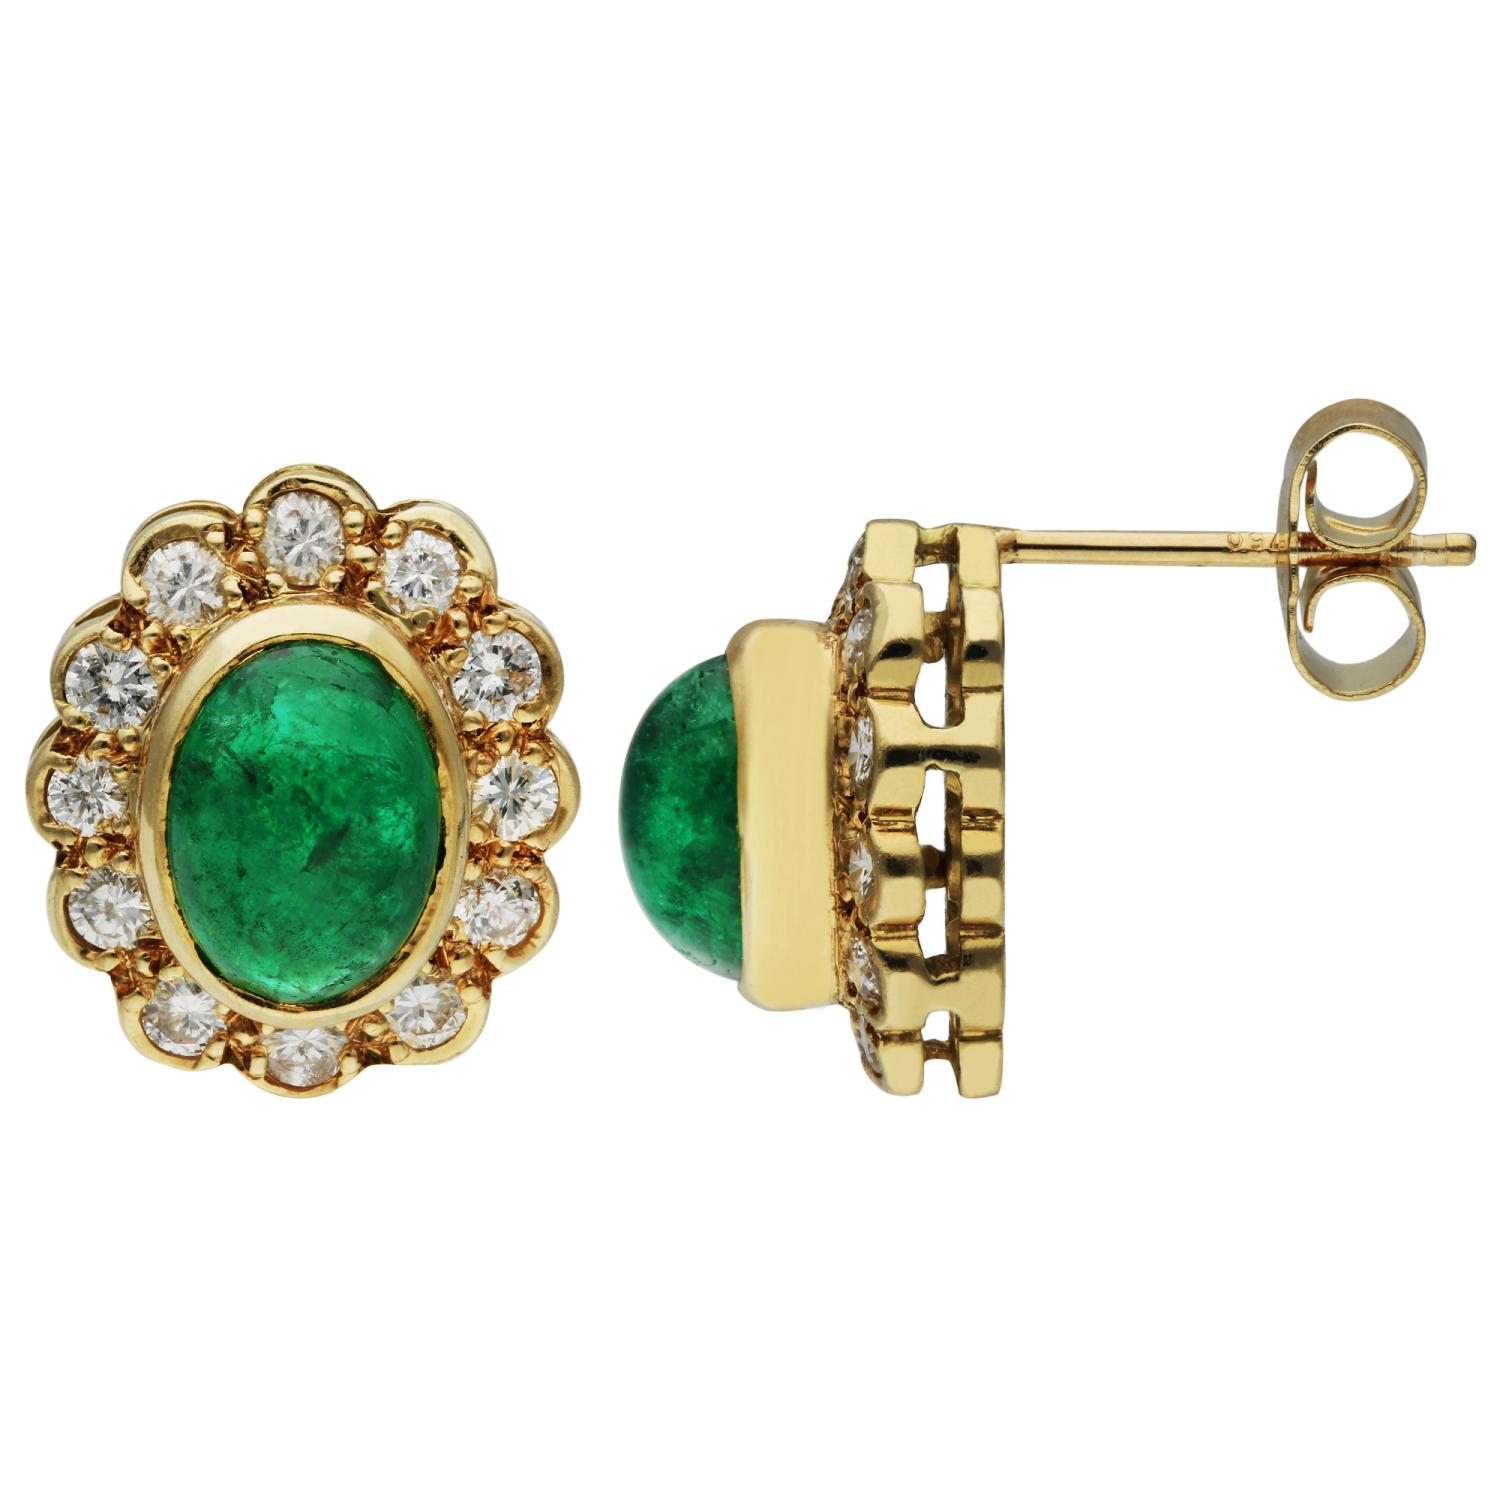 18ct Yellow Gold 2.65ct Cabochon Emerald & 0.40ct Diamond Cluster Earrings

Elevate your elegance with our Pair of Pre-Owned 18ct Yellow Gold Emerald & Diamond Cluster Earrings, a breath taking combination of opulence and sophistication.

Each